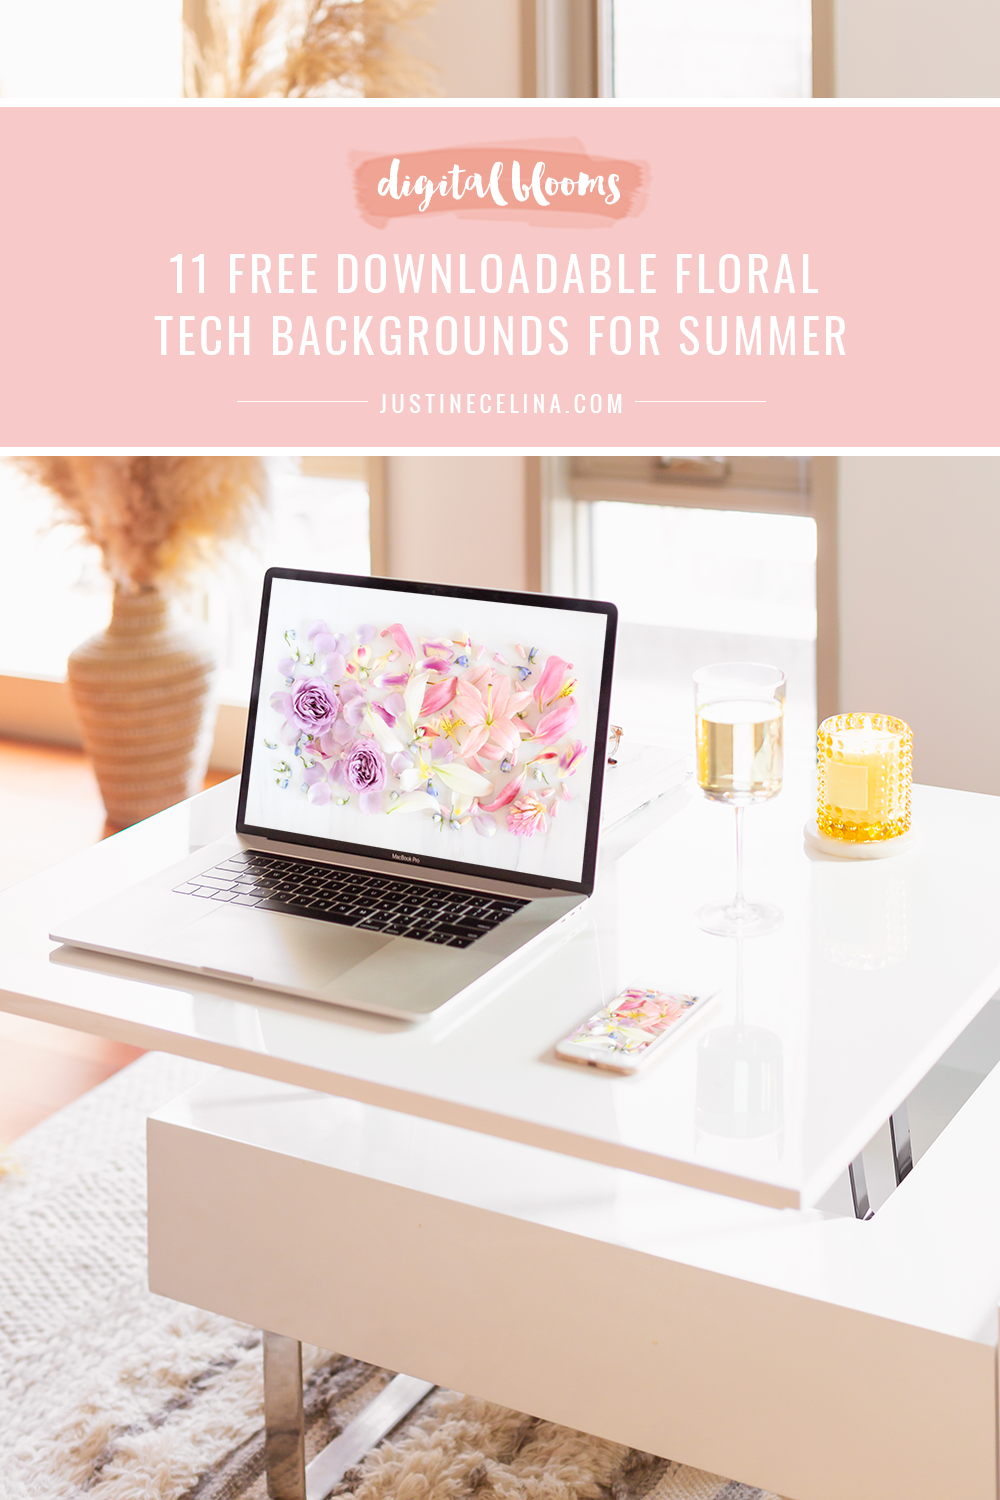 DIGITAL BLOOMS JUNE 2021 | 11 Free Downloadable Floral Tech Backgrounds for Summer | Feminine WFH set up with a MacBook Pro and iPhone featuring JustineCelina’s pastel June Digital Blooms floral tech wallpaper, a glass of white wine and a yellow candle in a bright and sunny bohemian Living Room | Female Entrepreneur Digital Wallpapers | The Best of Justine Celina’s Summer Digital Blooms | Summer Flower Desktop Wallpaper | Calgary Creative Lifestyle Blogger // JustineCelina.com